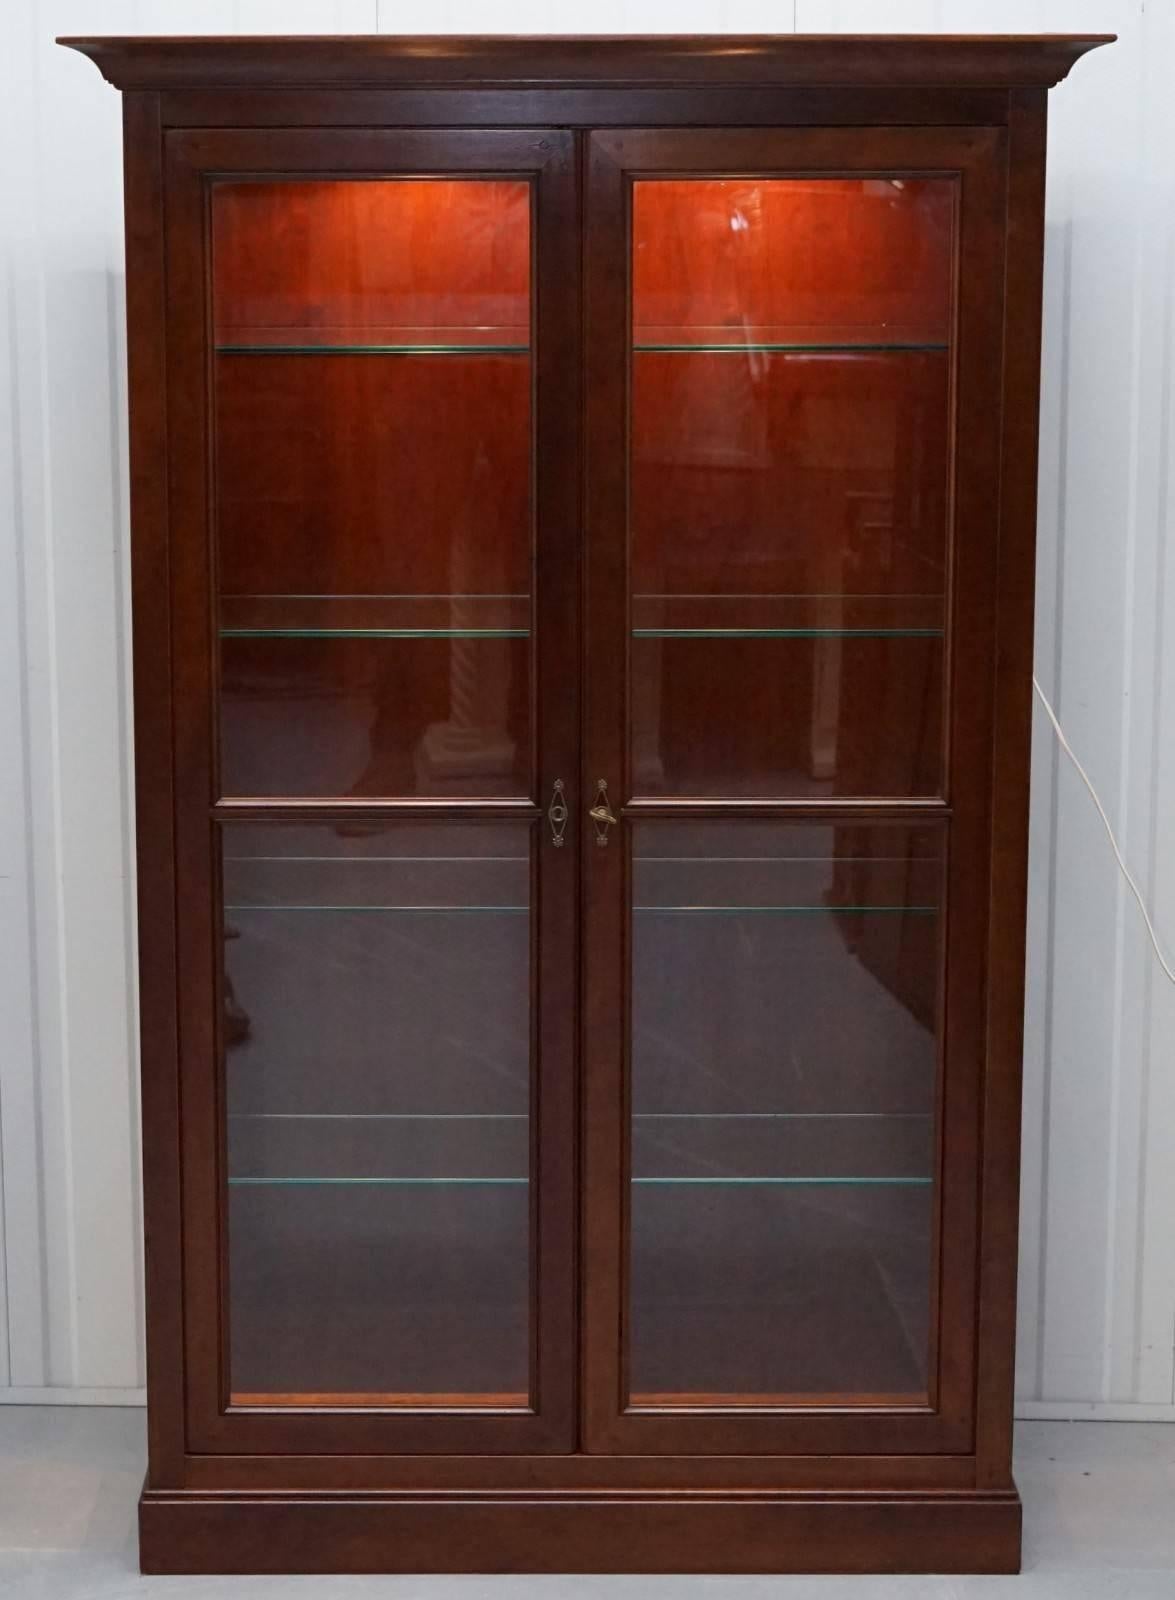 We are delighted to offer for sale this stunning Grange solid cheerywood handmade in France display cabinet with glass shelves and built-in lights

A very good looking and well-made piece, the cabinet has glass panels on the sides to allow light